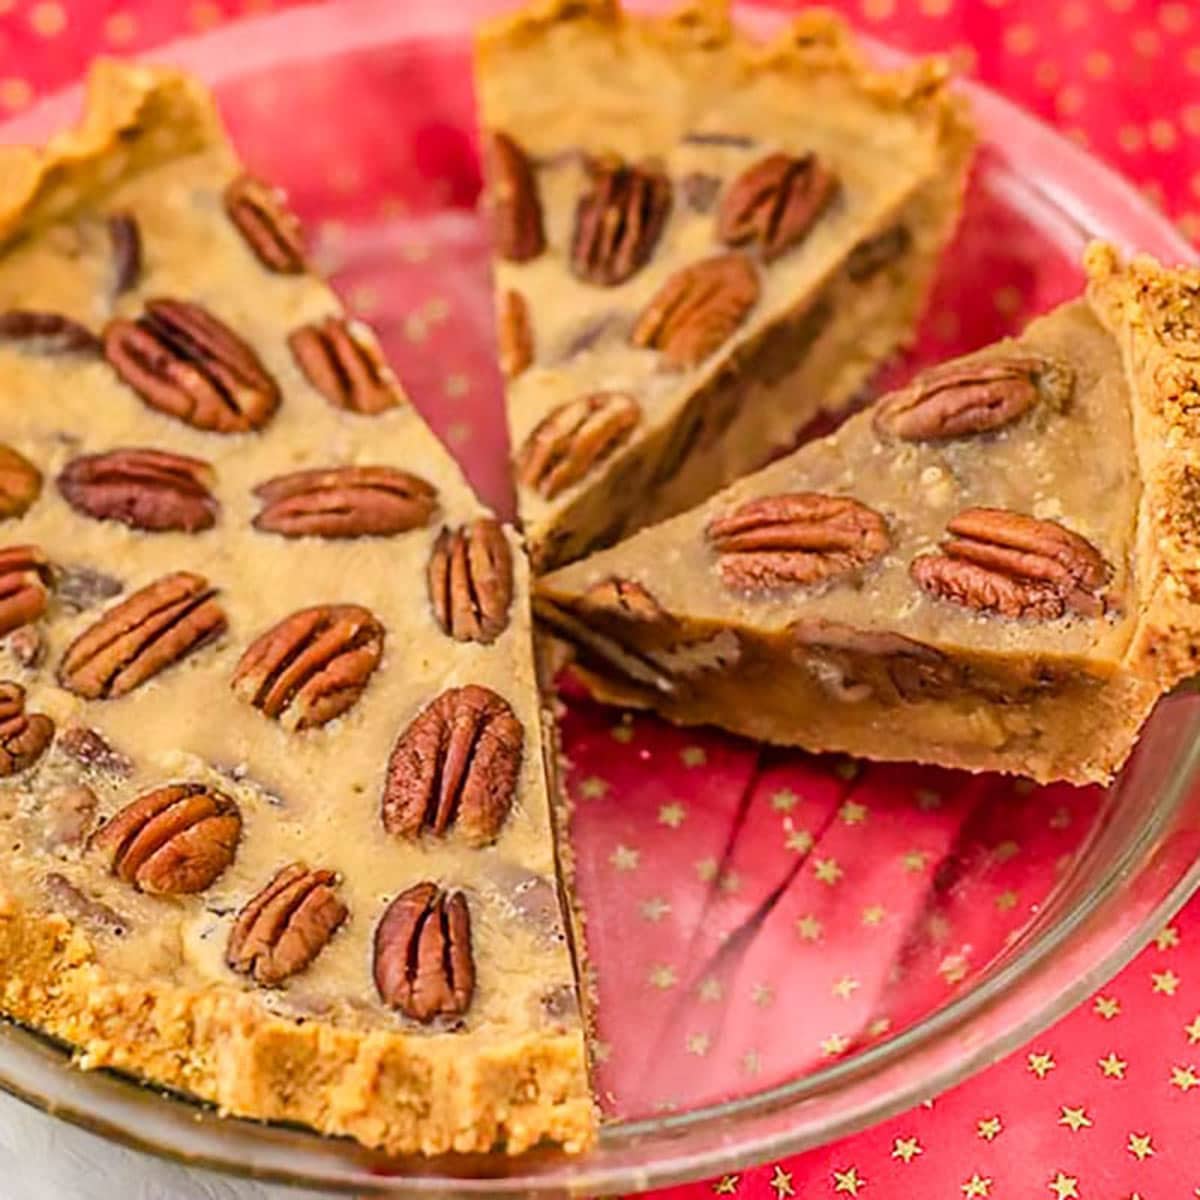 Keto pecan pie for Thanksgiving in a pie dish.